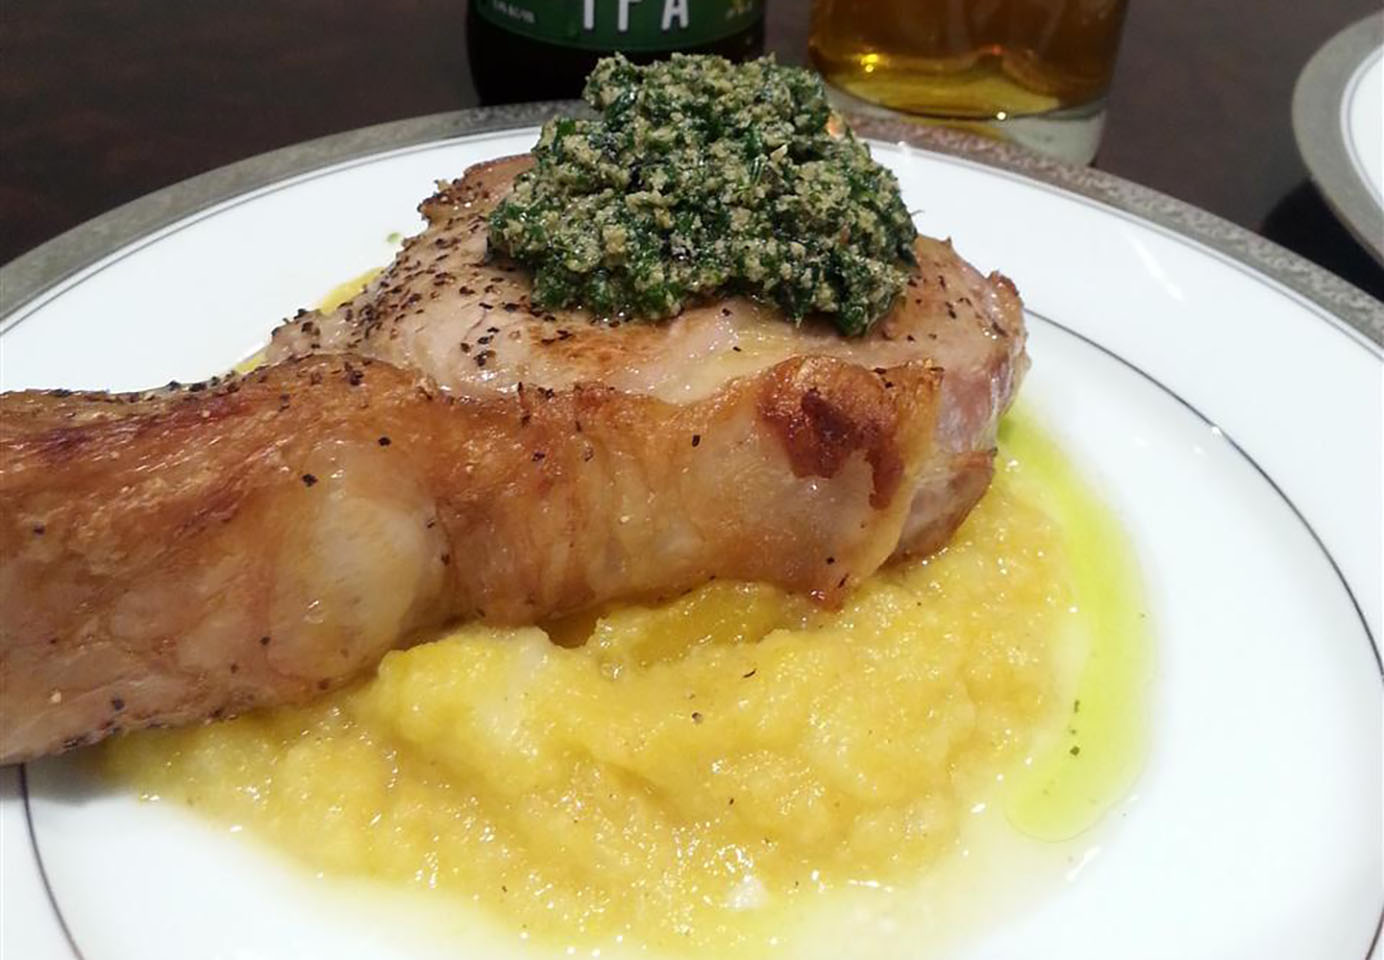 Pan-Seared Veal Chop with Roasted Kale Pesto and Butternut Squash and Parsnip Puree